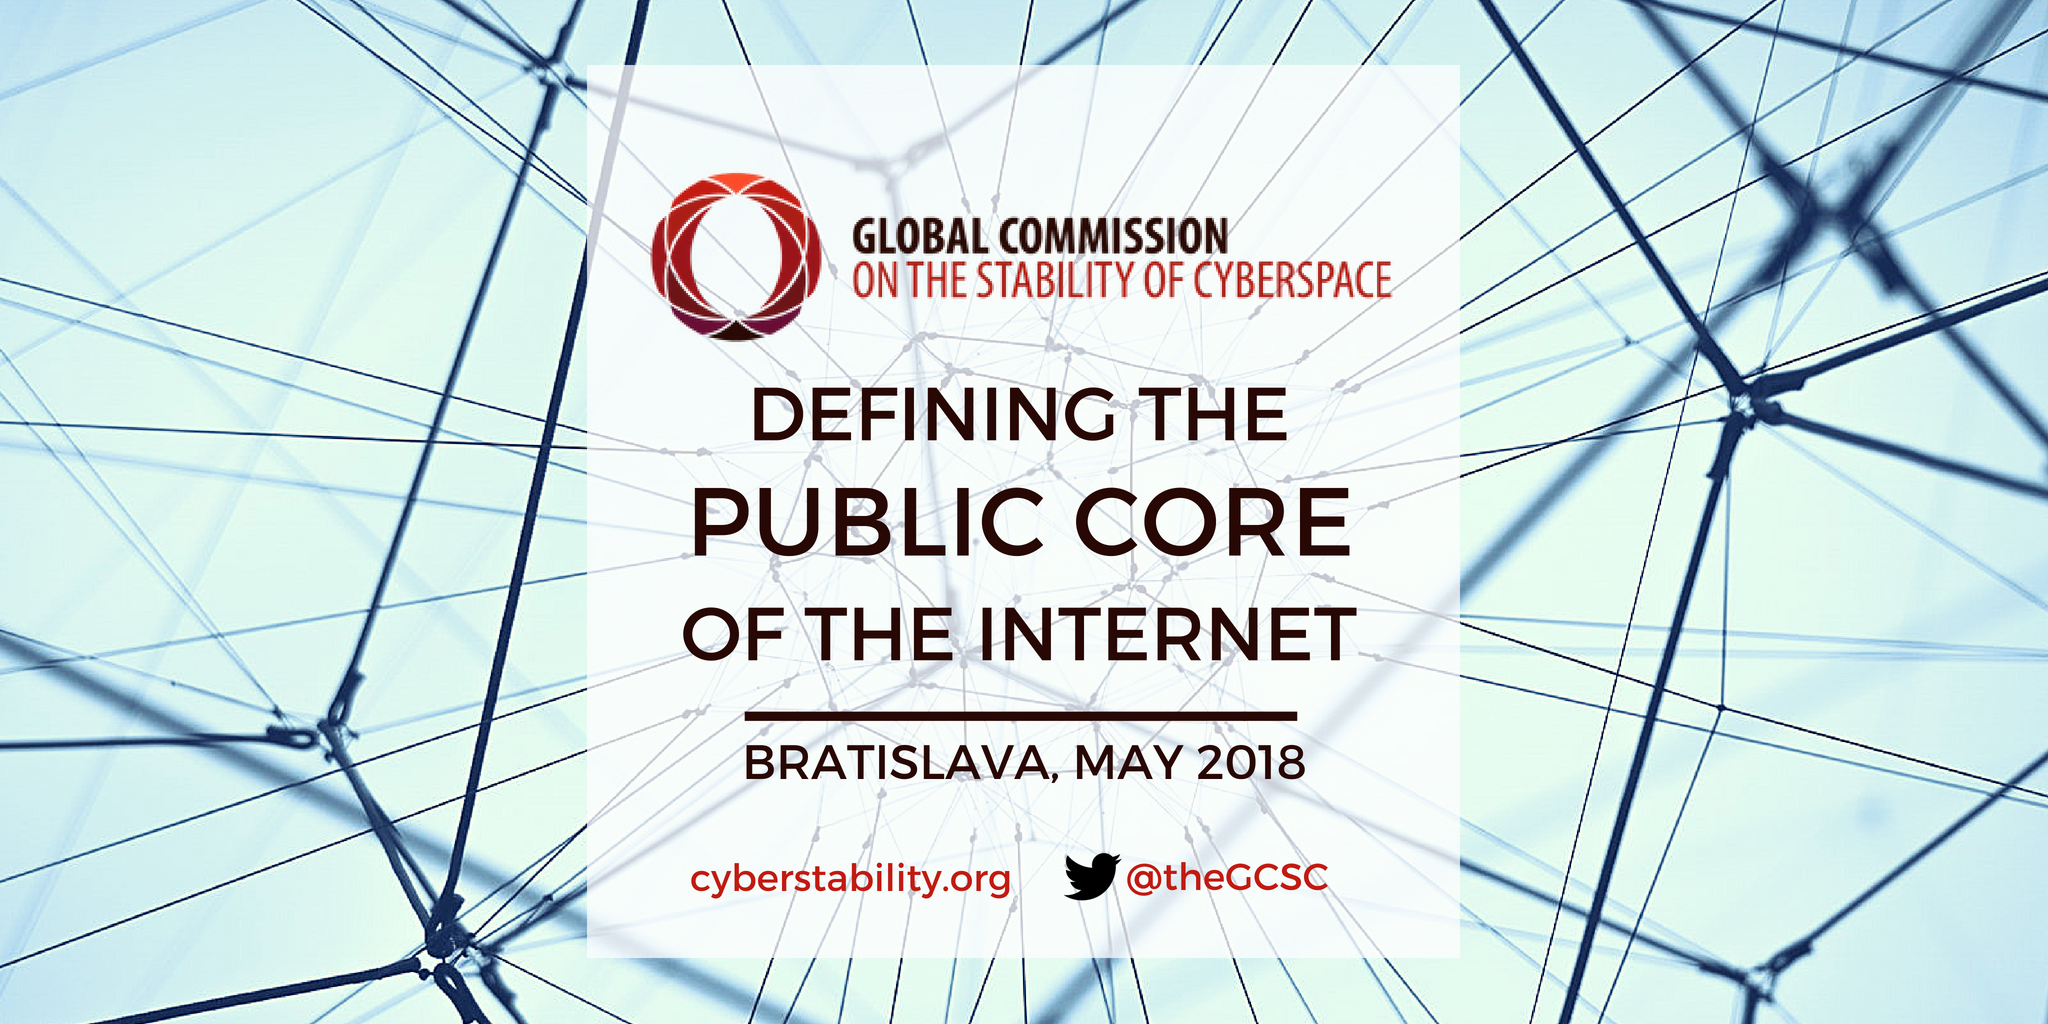 Global Commission Proposes Definition of the Public Core of the Internet